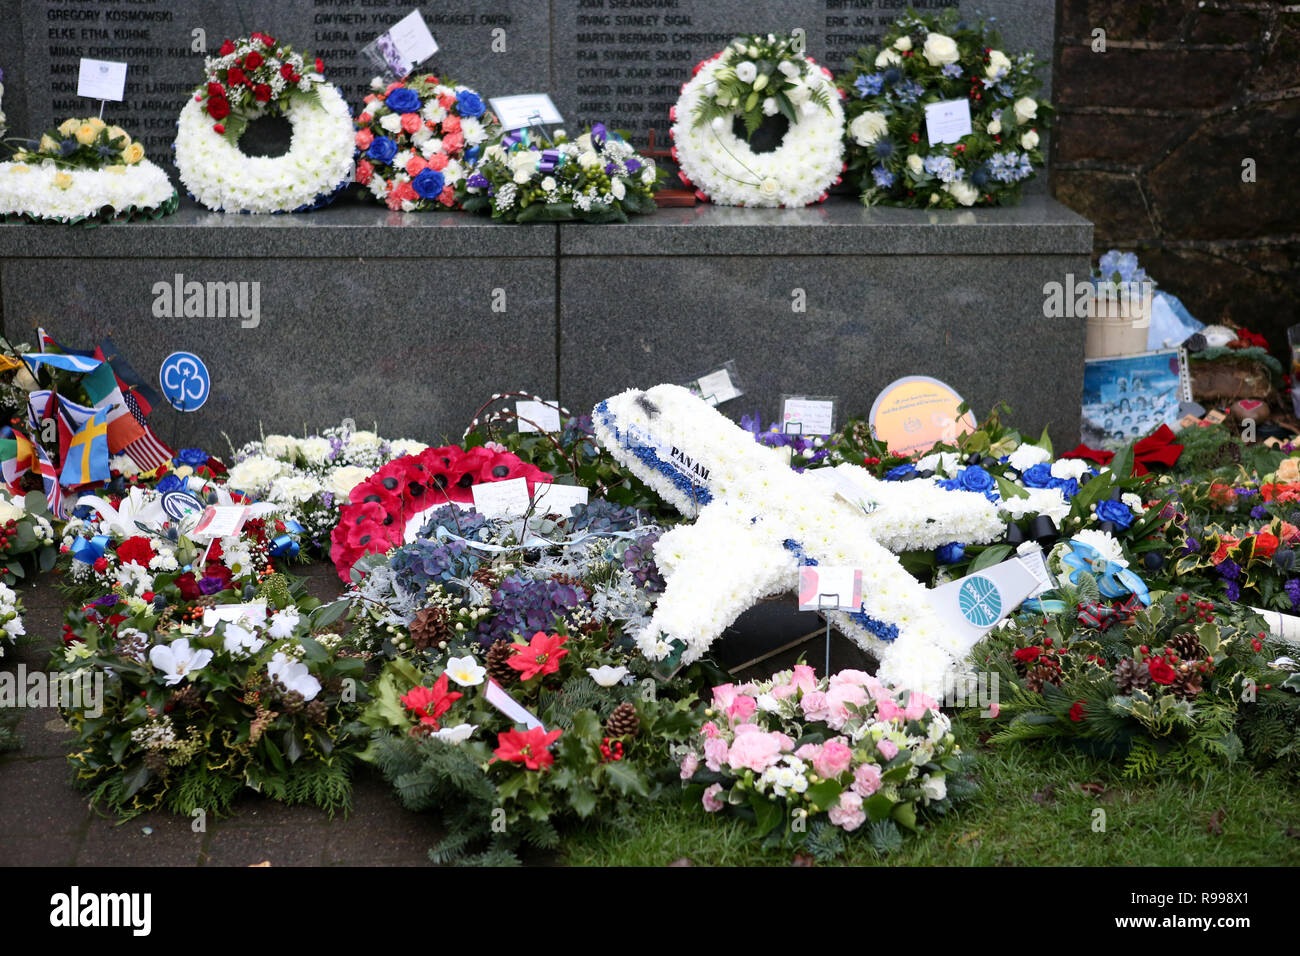 Floral tributes left during the commemoration service in the Memorial Garden at Dryfesdale Cemetery in Lockerbie to mark the 30th anniversary of the Lockerbie bombing. Stock Photo